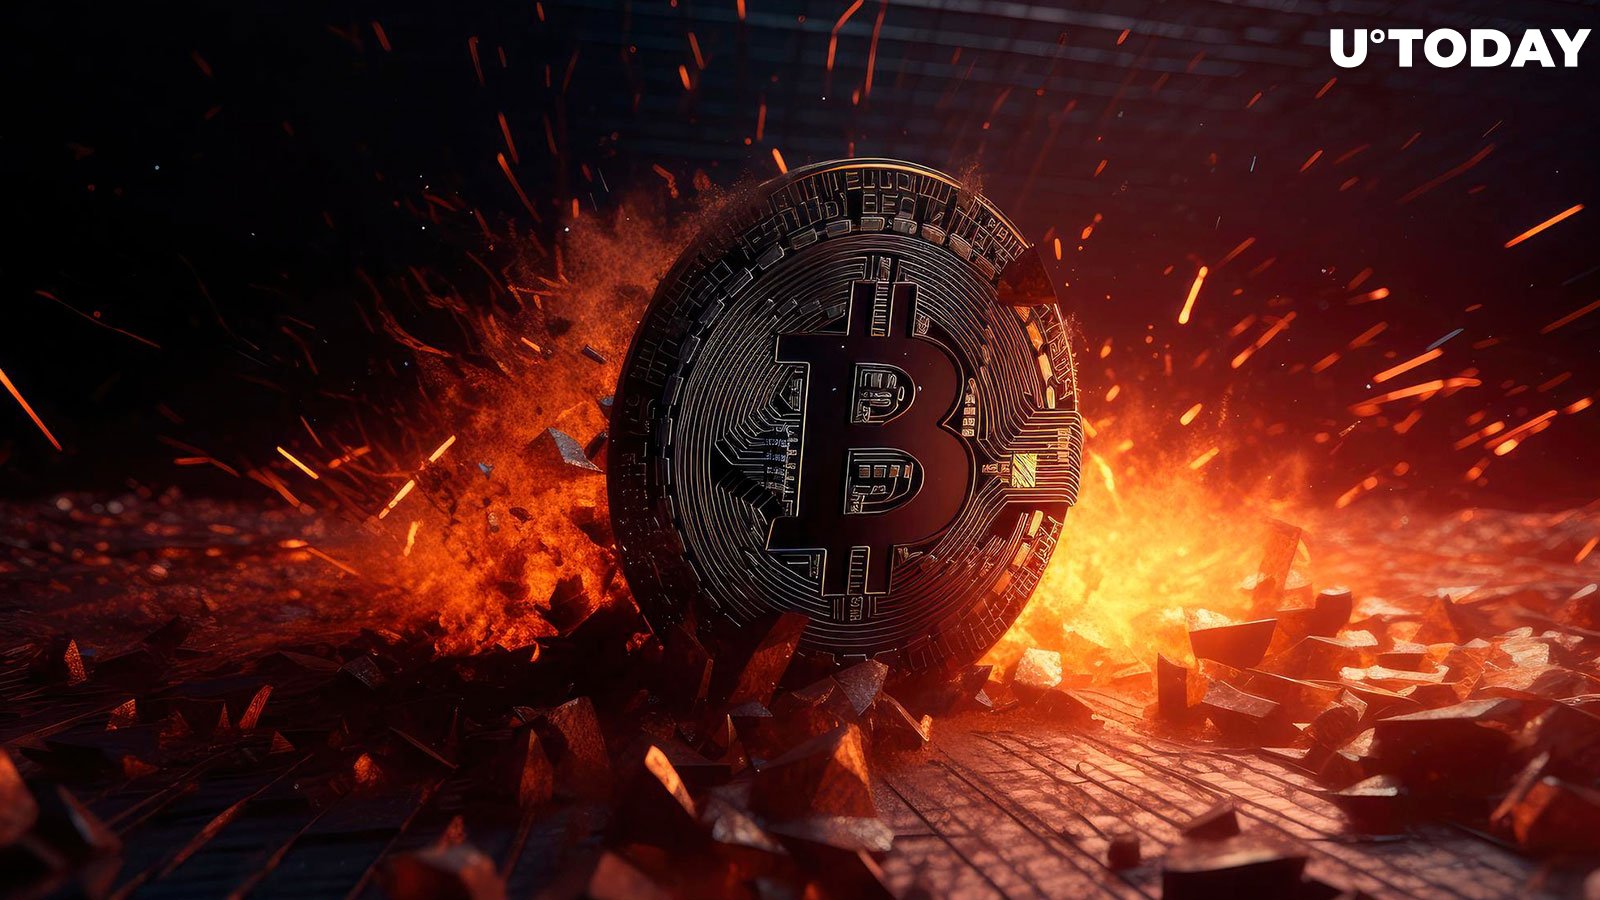 5 Signs of Crypto Market Crash to Watch Before It Happens